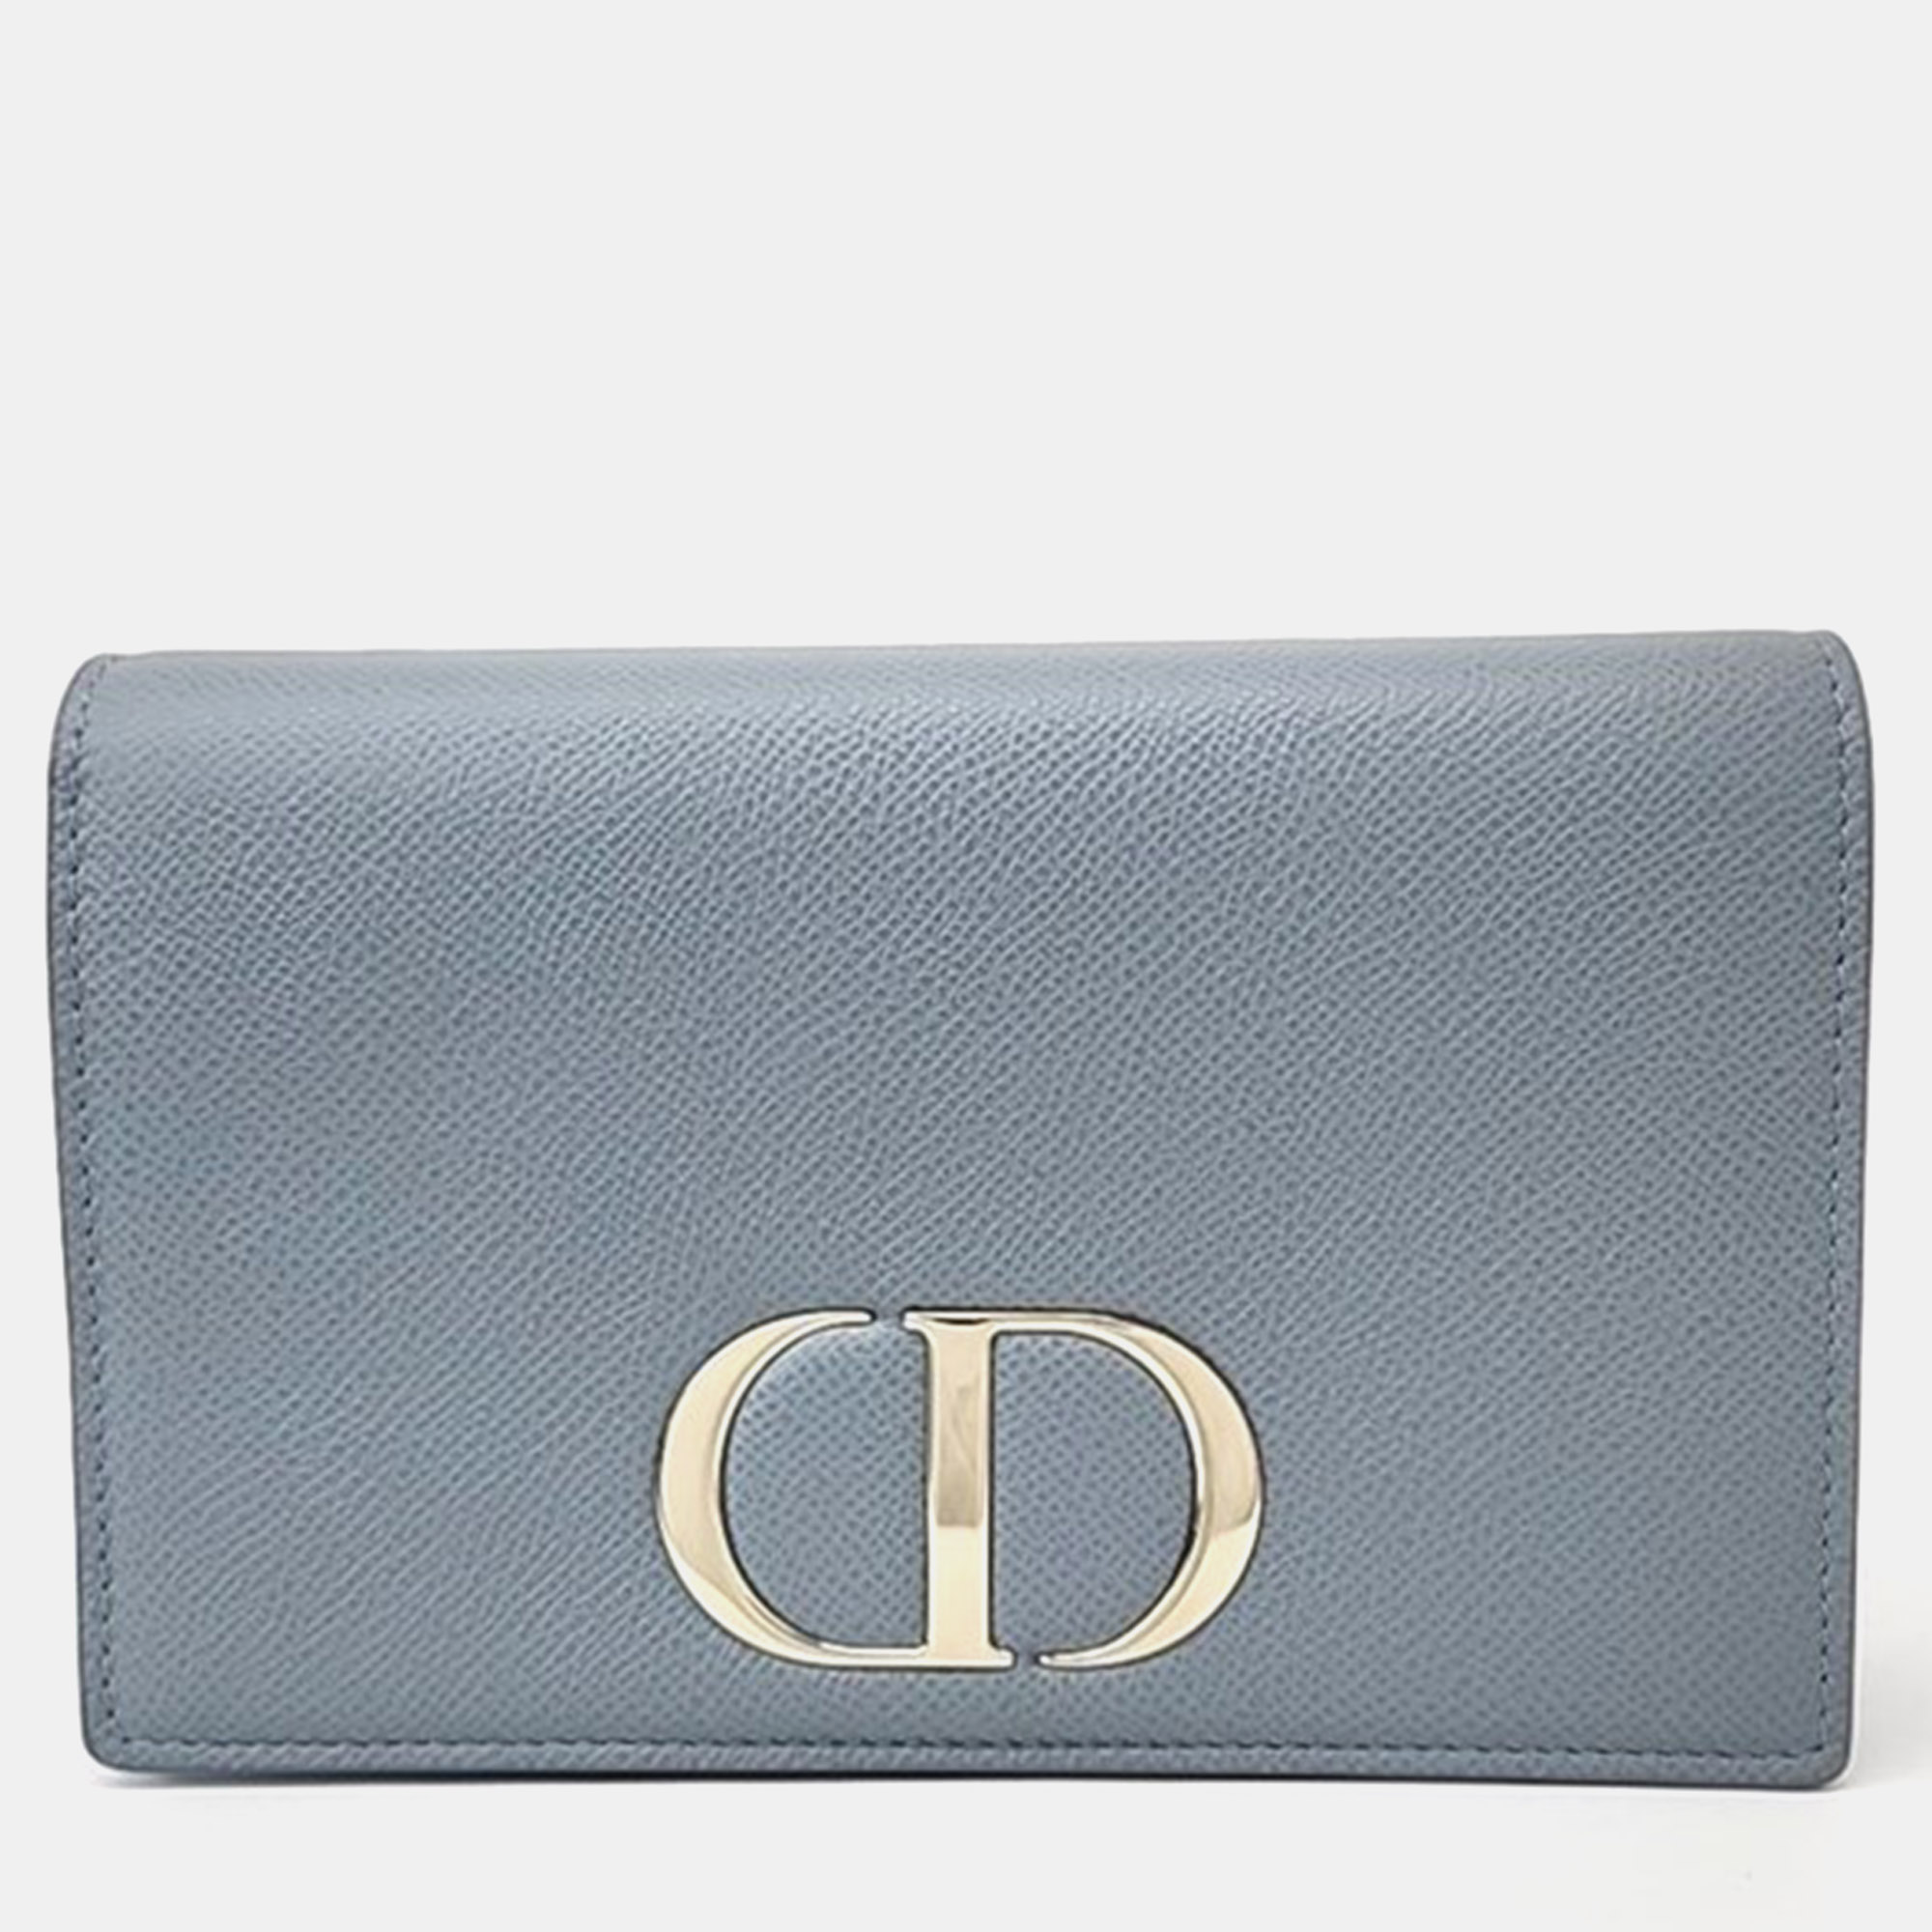 Christian dior 30 montaigne two-in-one pouch bag s2086